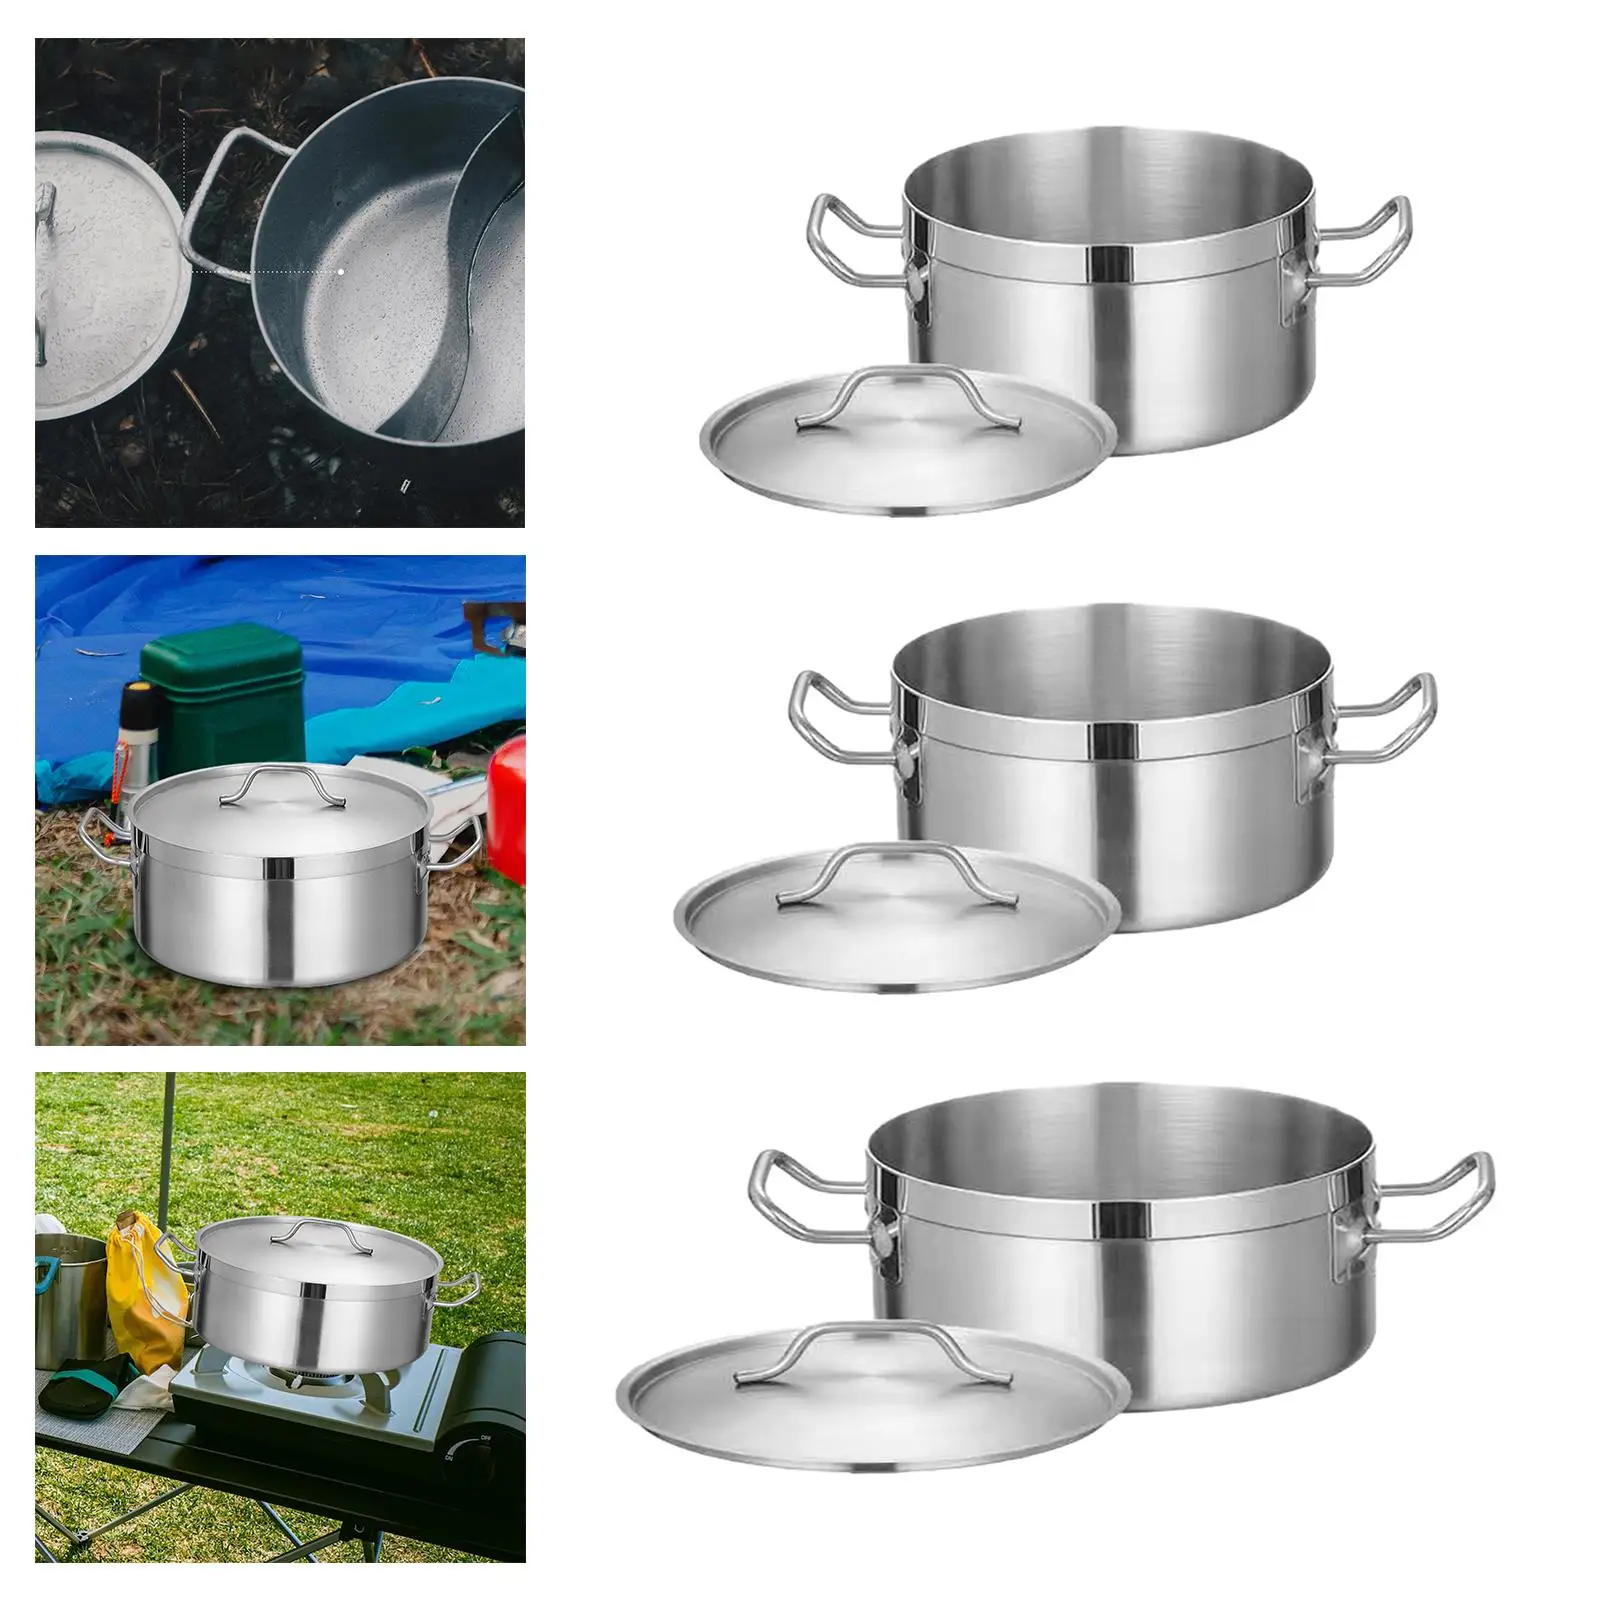 Stainless Steel Stockpot Cookware Casserole Pot Heavy Duty Induction Stockpot for Kitchen Outdoor Camping Household Commercial